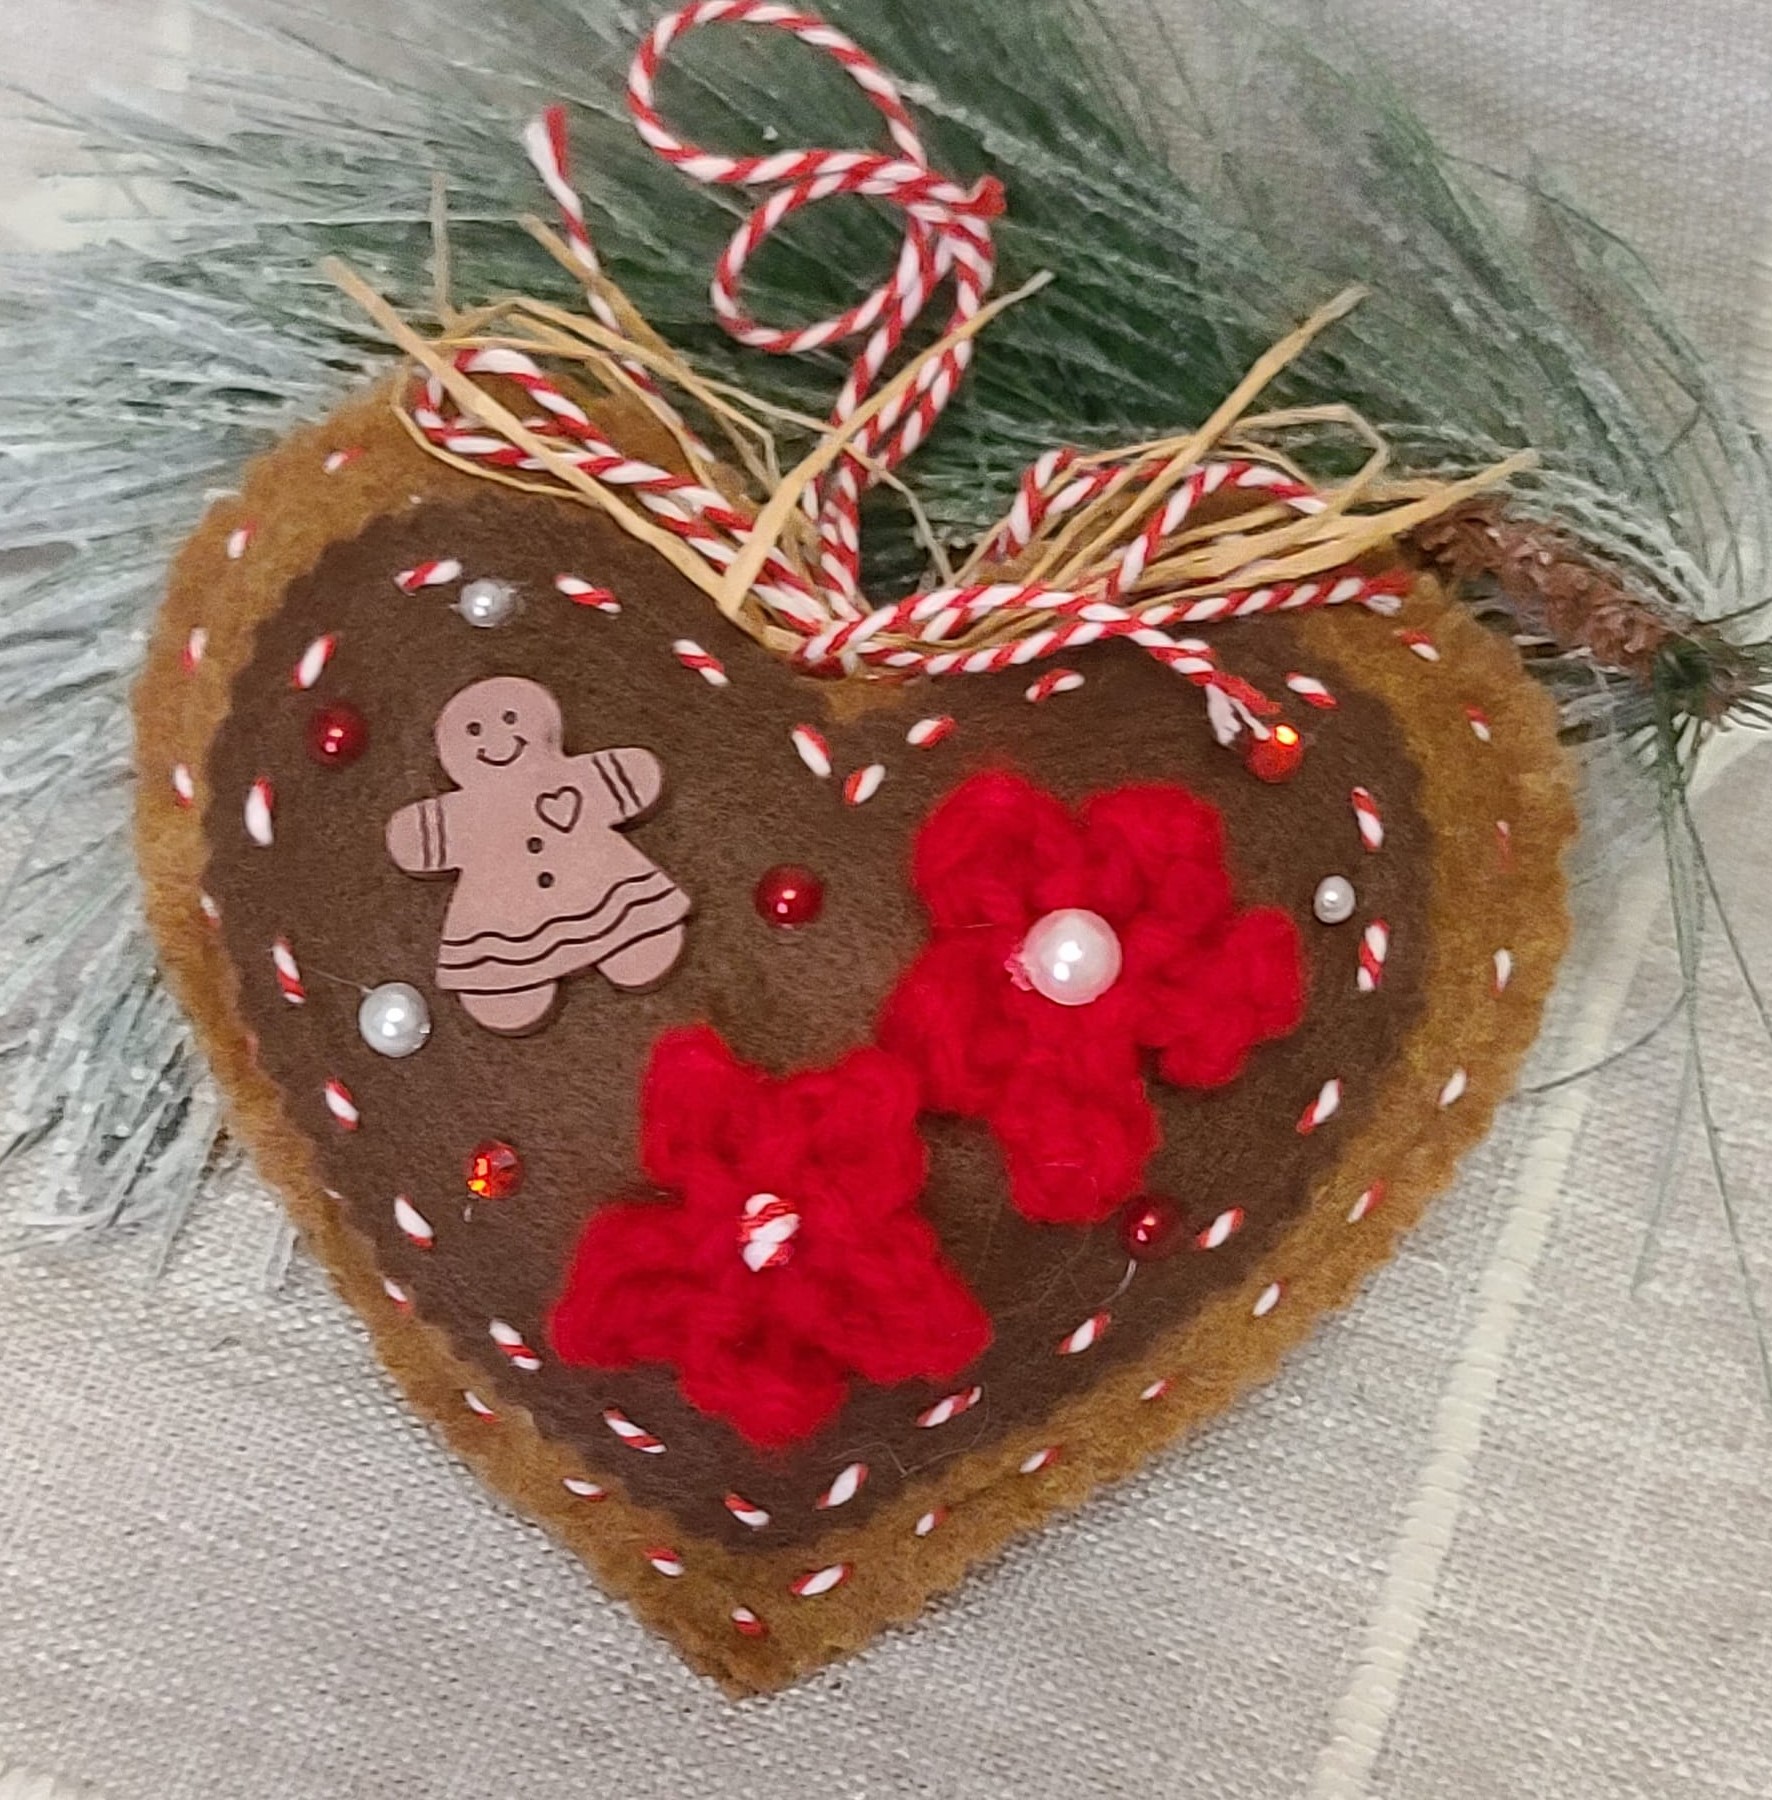 Gingerbread and chocolate icing with red accents heart ornament